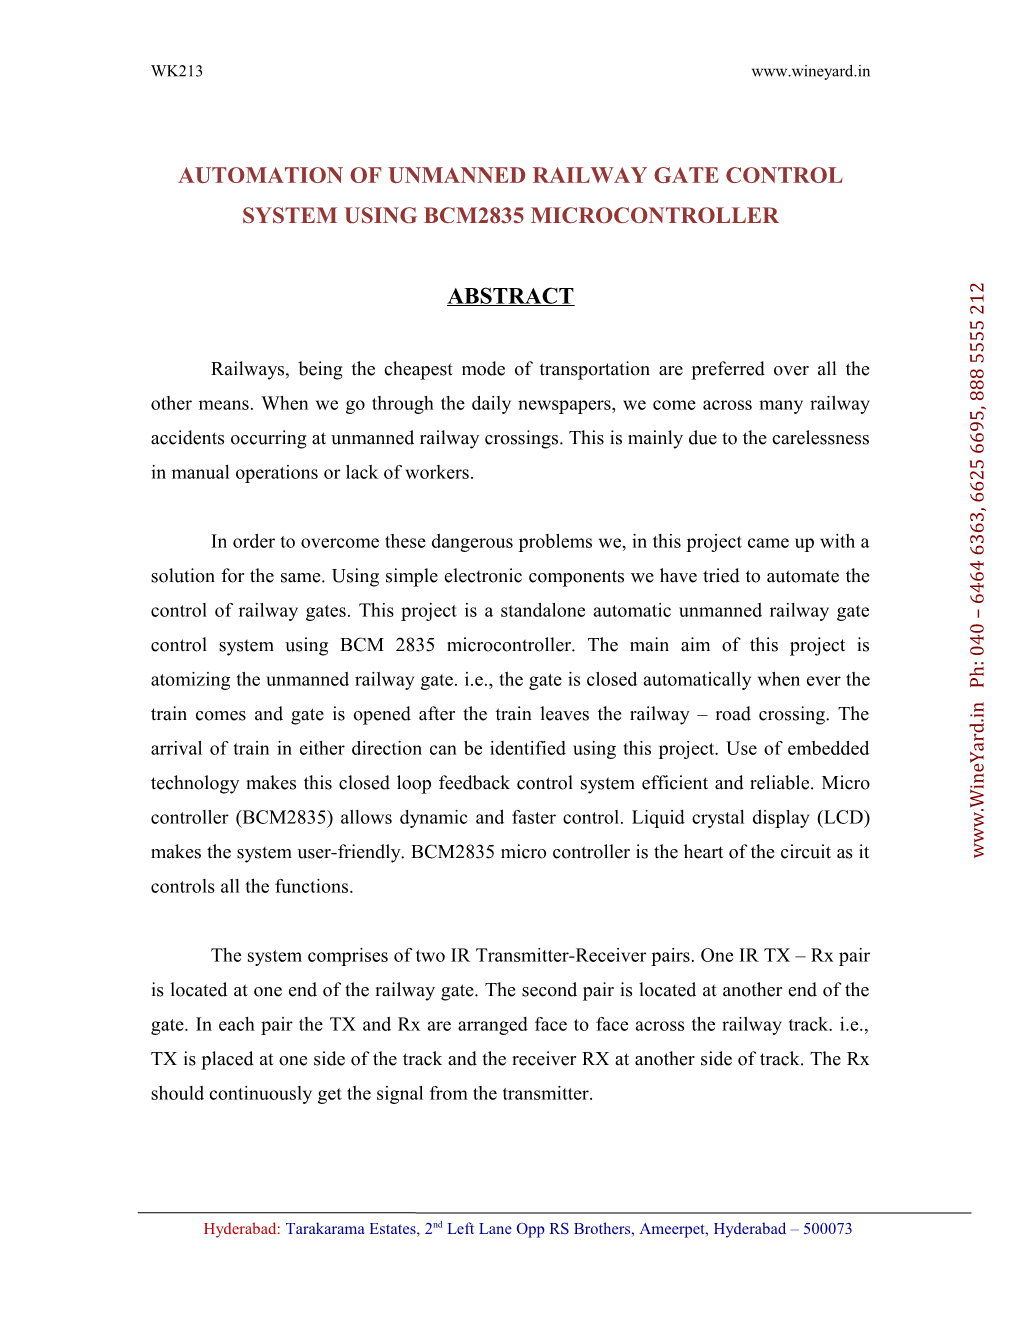 Automation of Unmanned Railway Gate Control System Using 89C51 Microcontroller